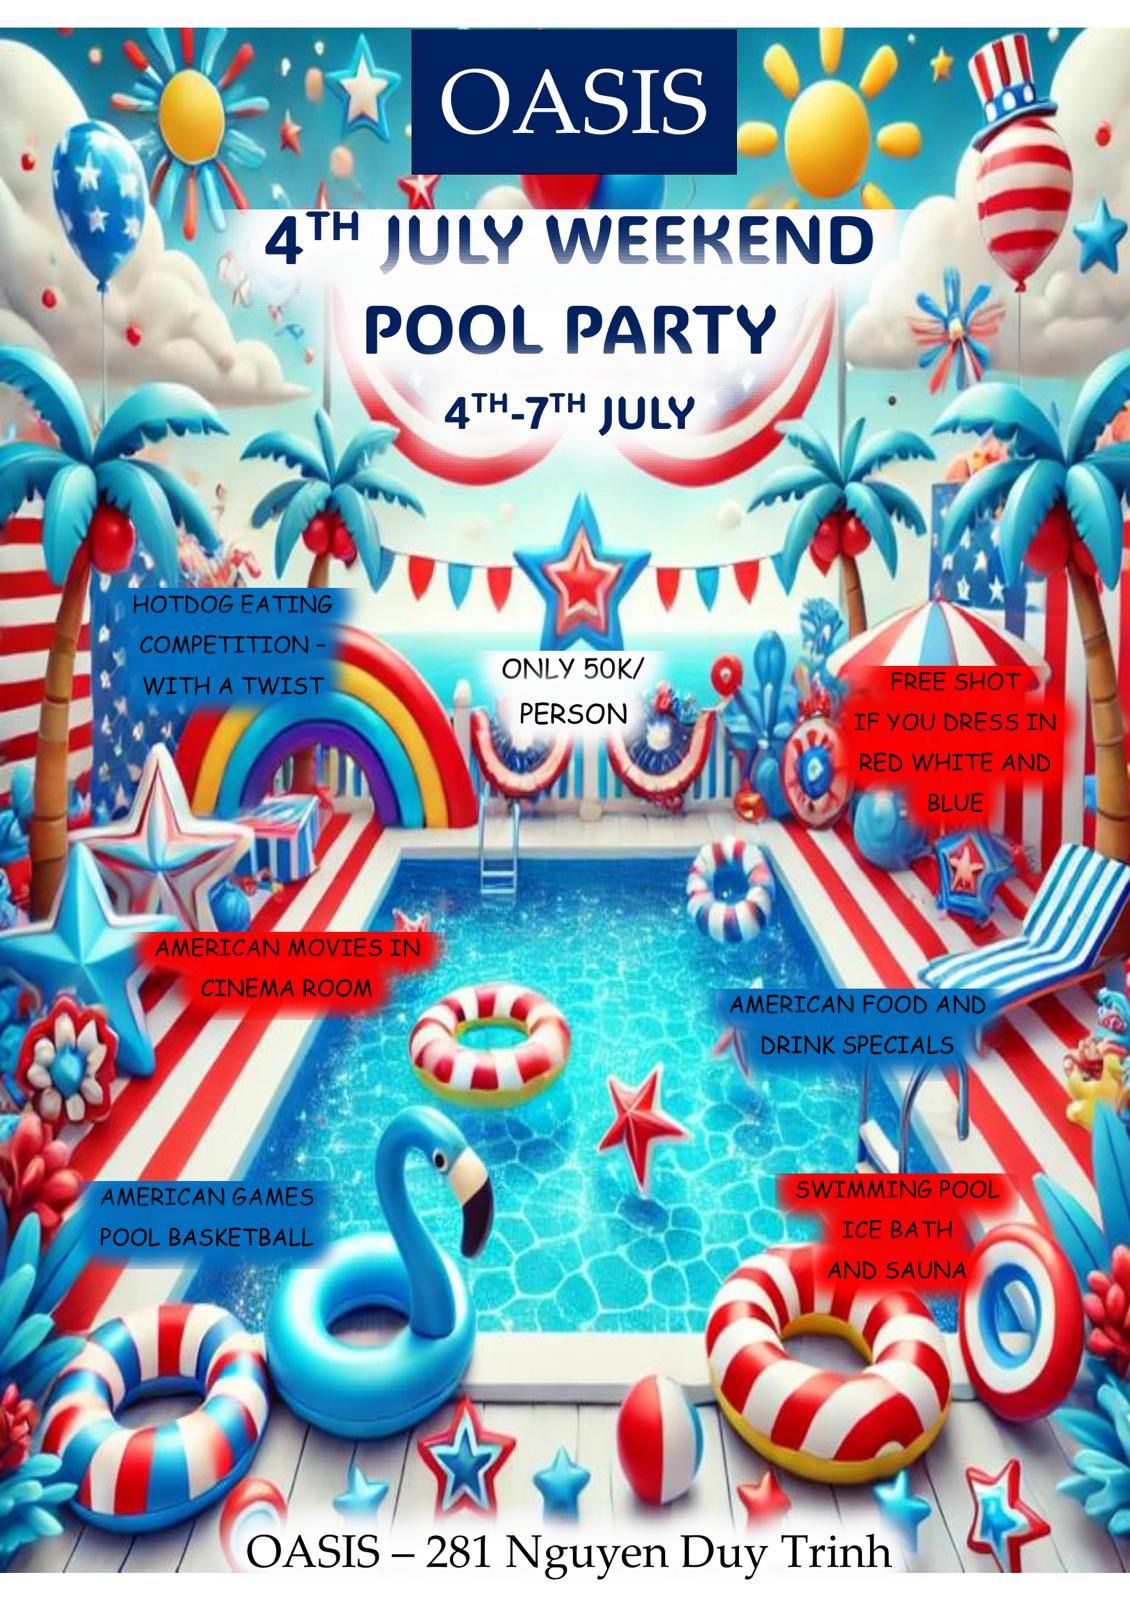 4th July Weekend Pool Party